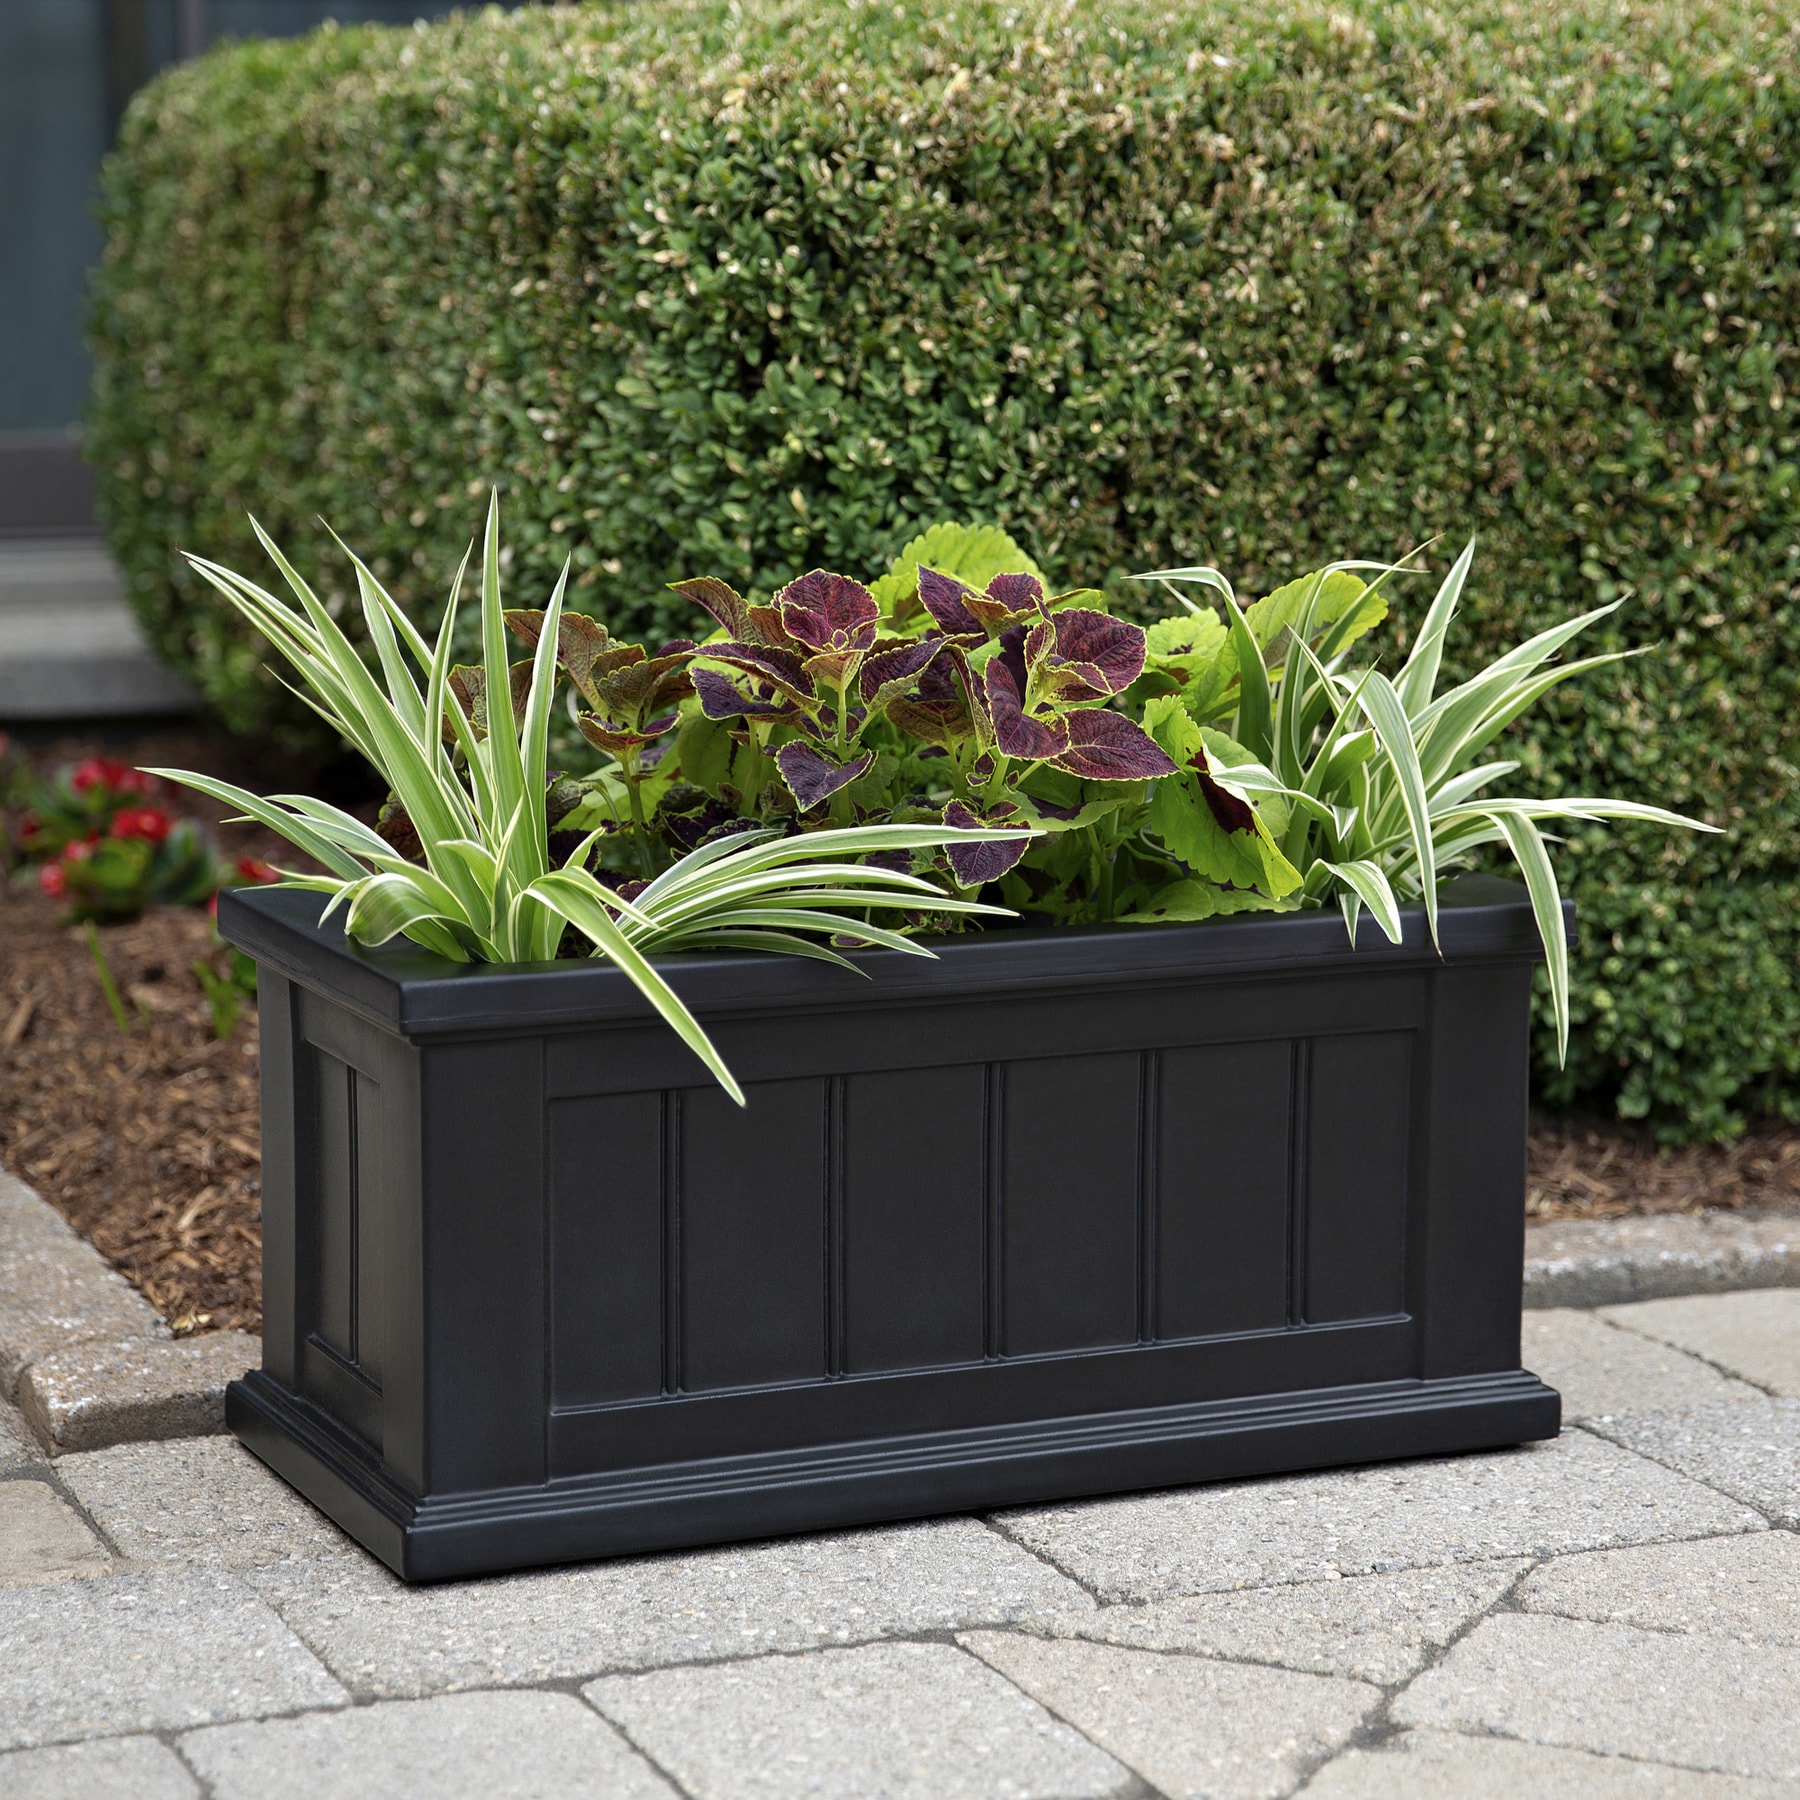 Mayne 24-in W x 11-in H Black Resin Traditional Outdoor Planter in